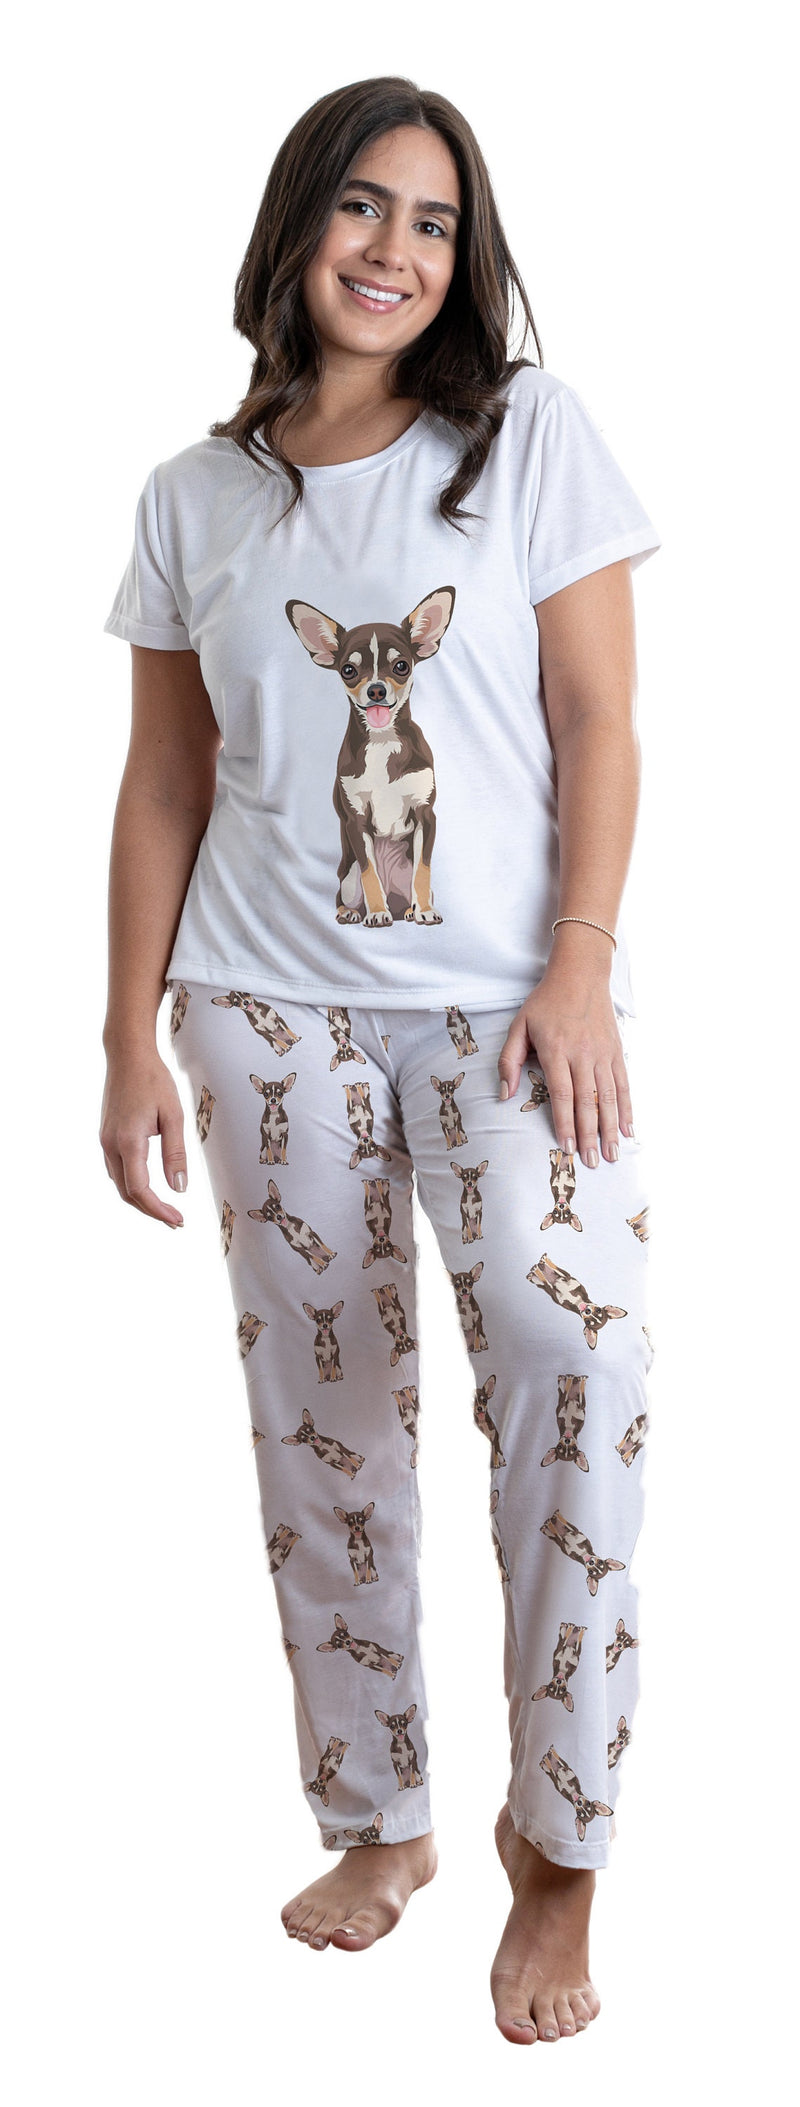 Brown chihuahua 2 piece Pj set with long pants